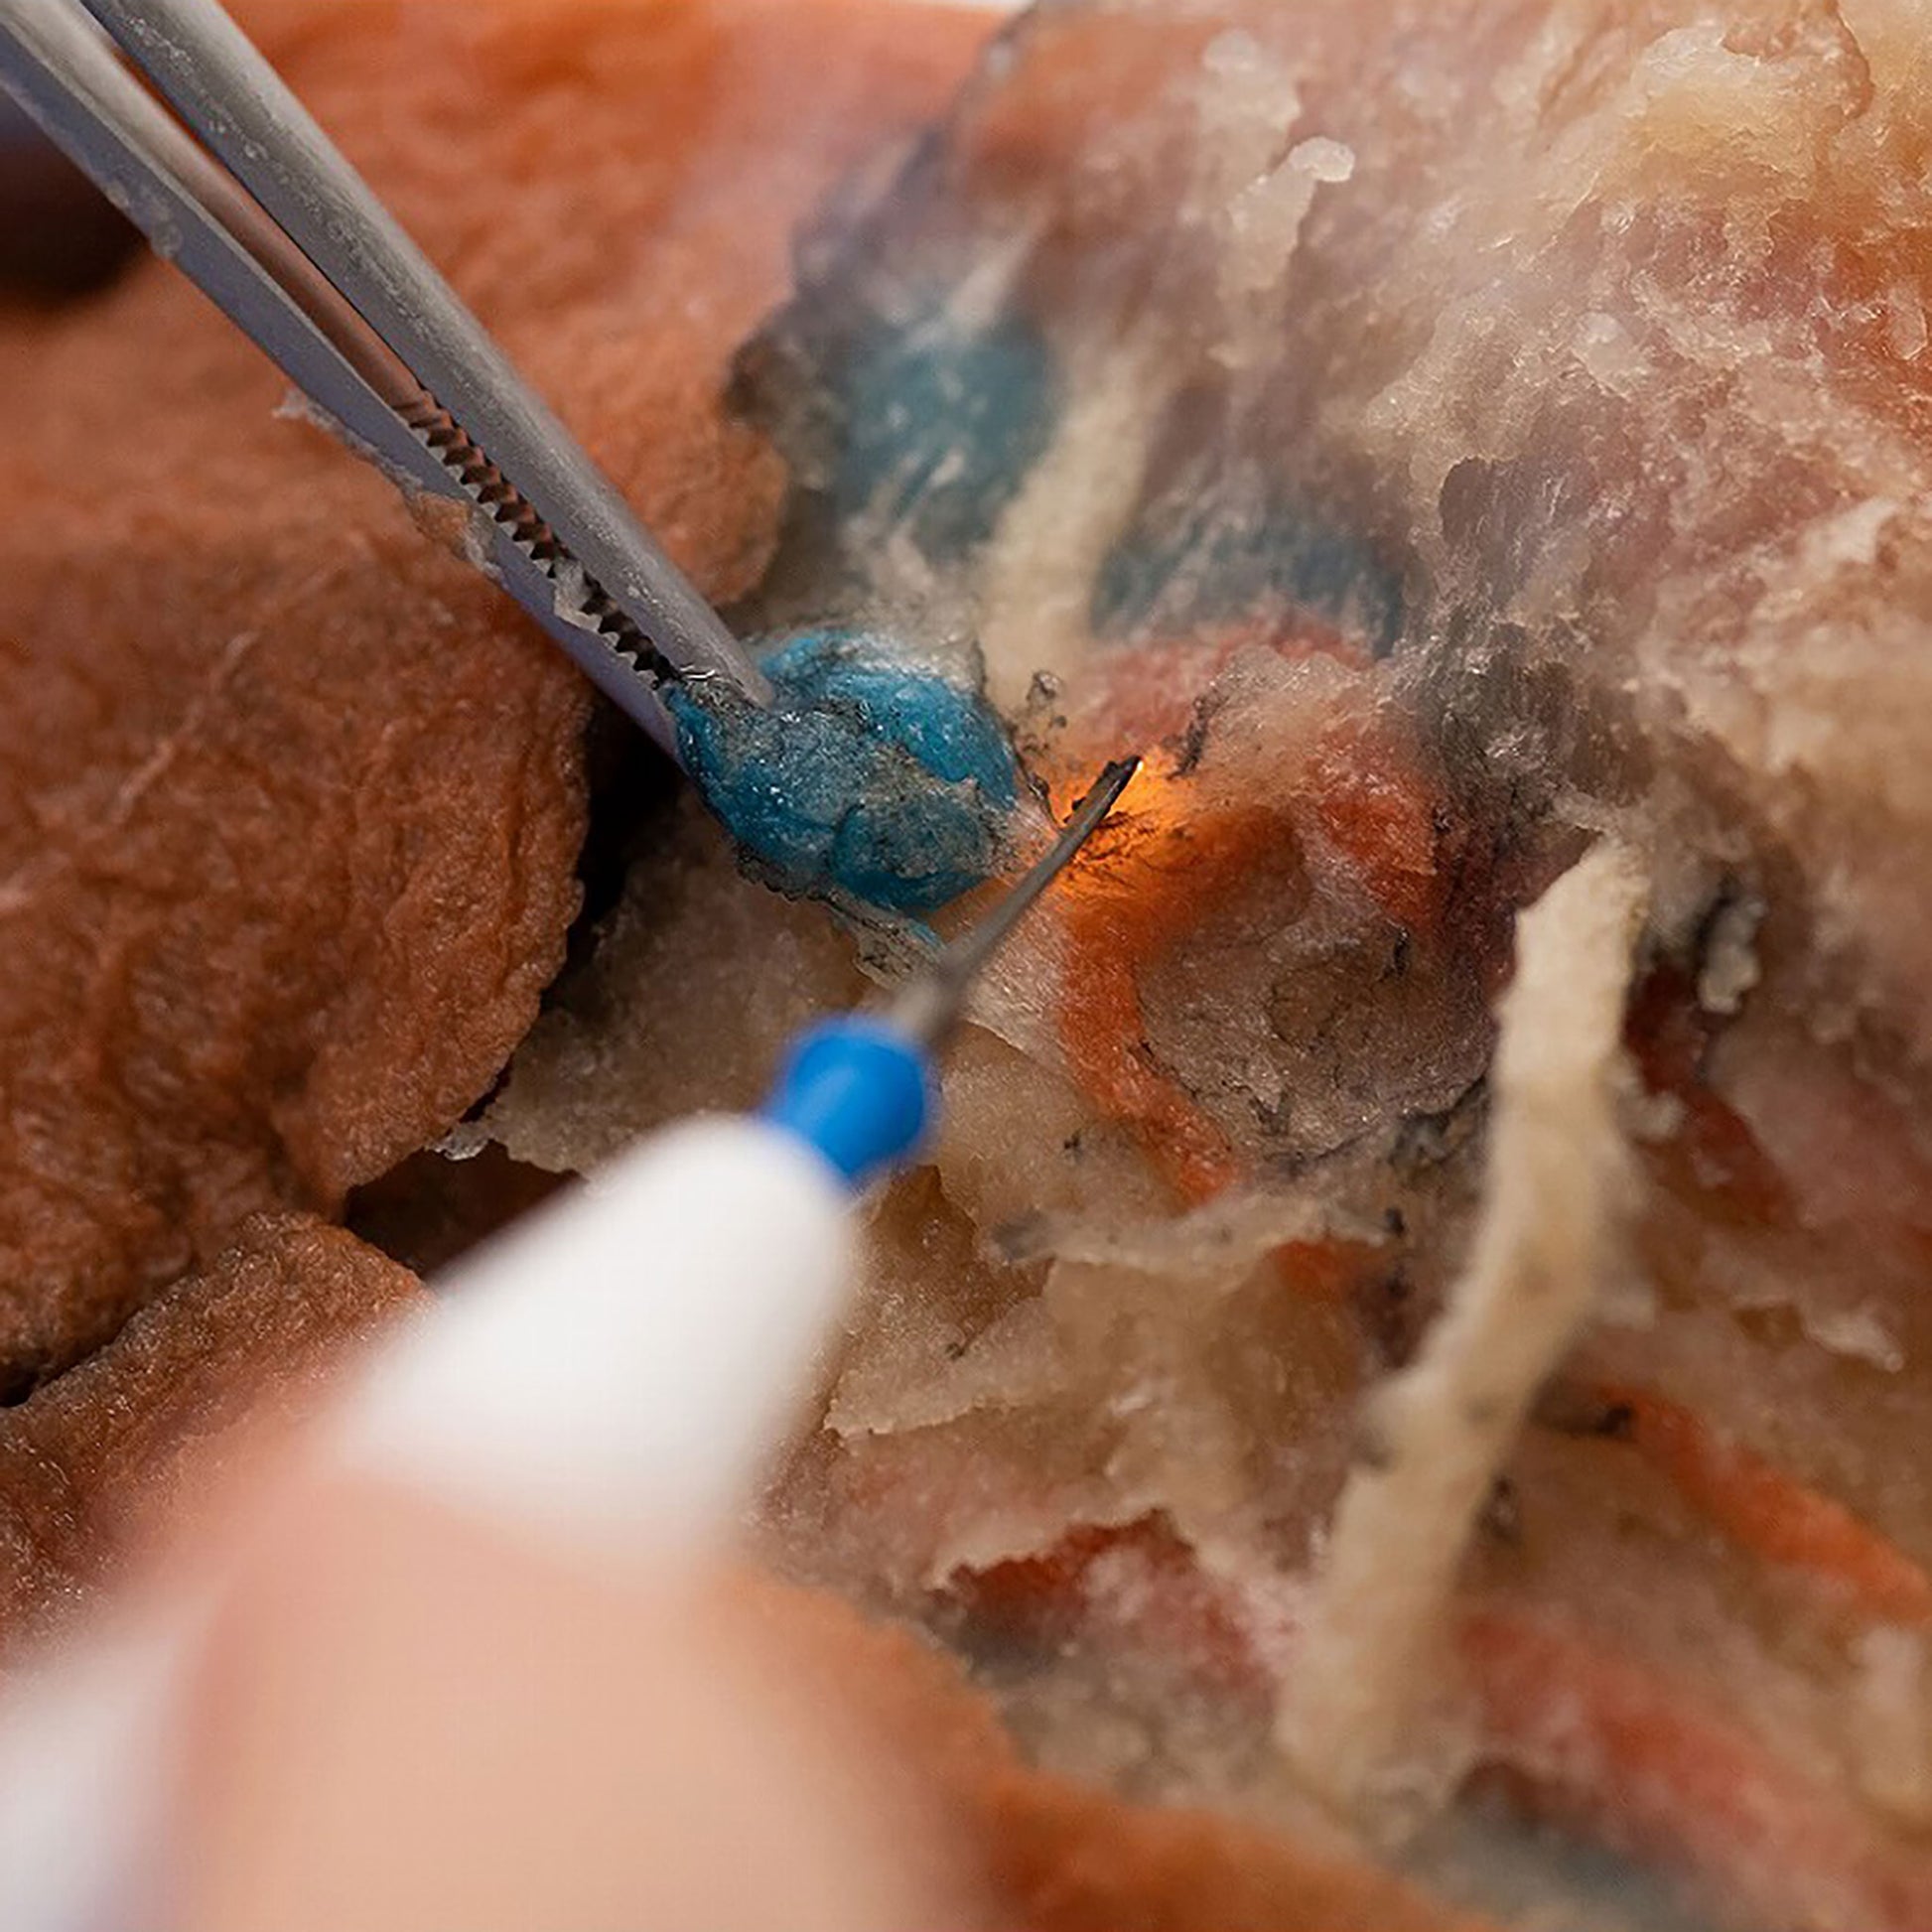 Lymph node resection training on the RBM2 Model using foreceps and an electrocautery pencil.